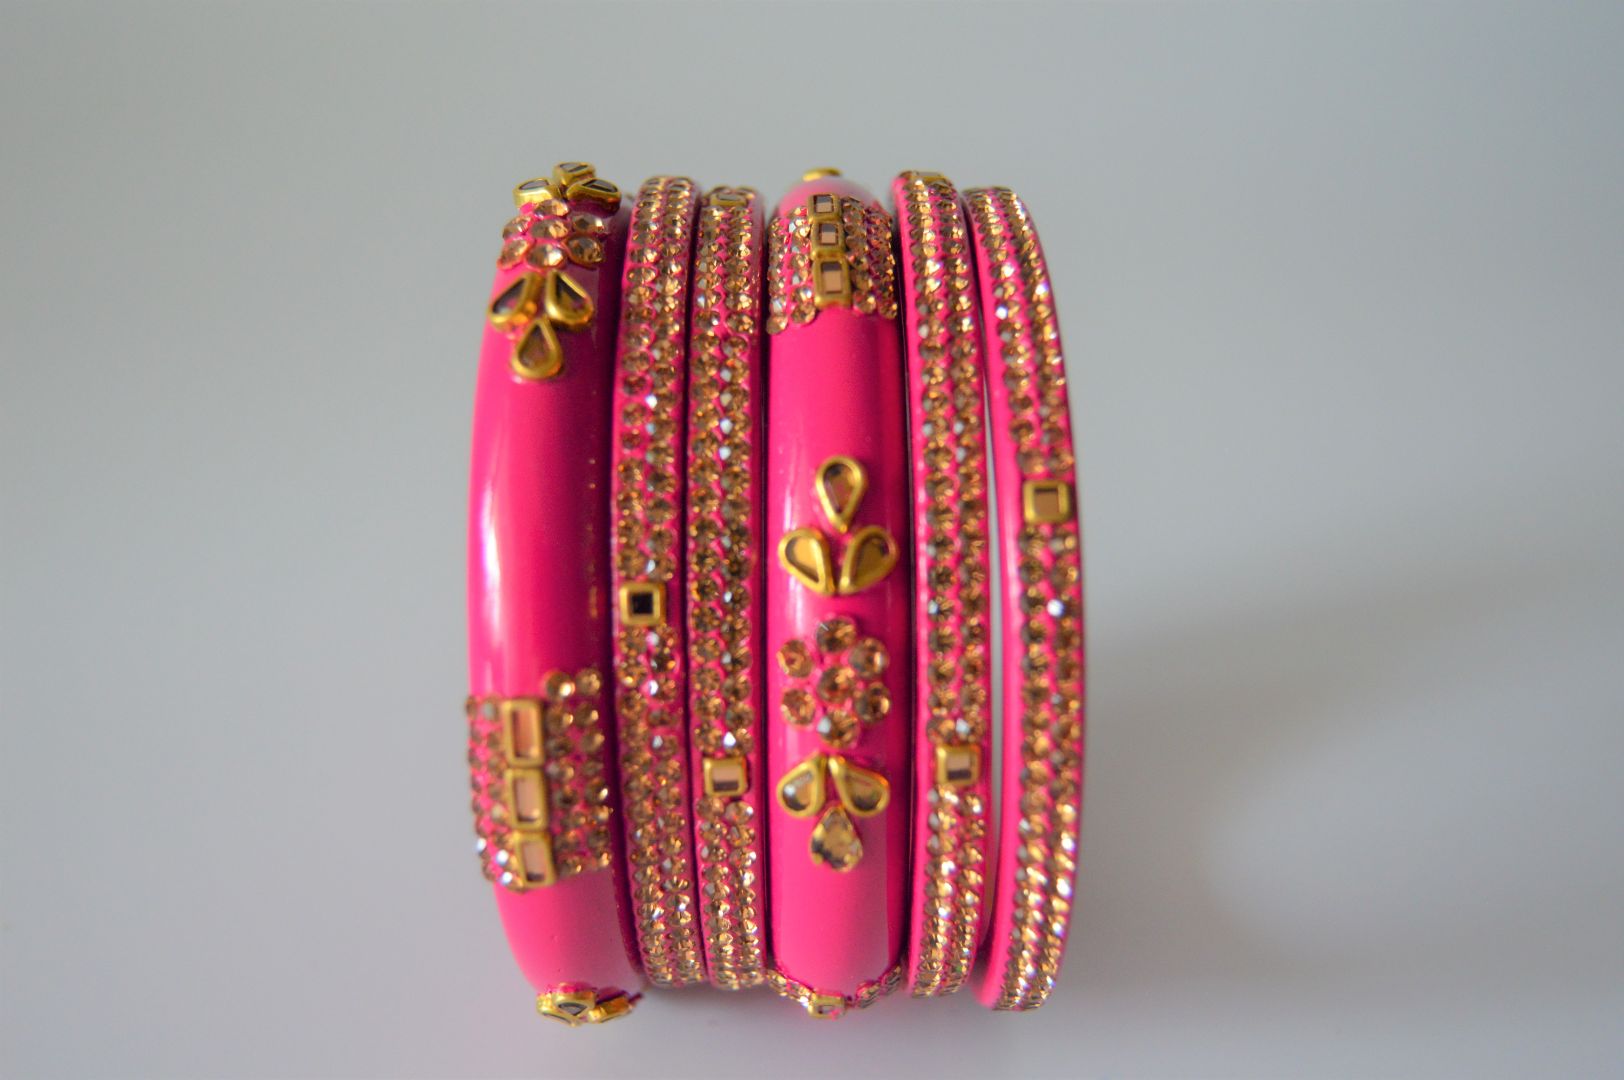 From India's Traditional Handmade Lac Bangle set Pink